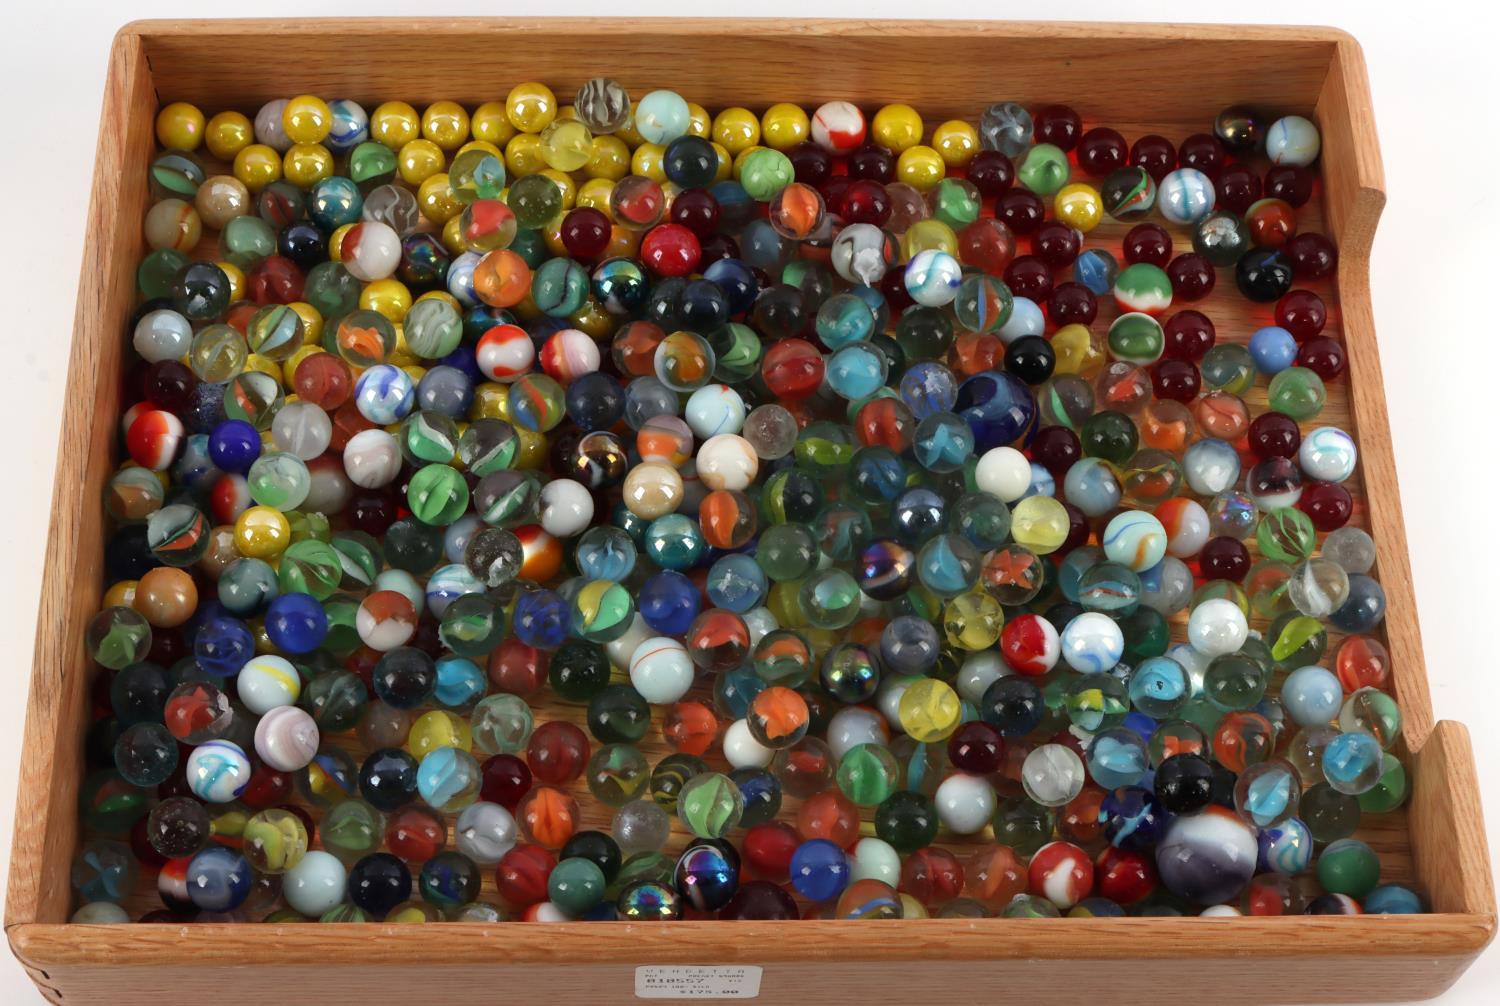 5 POUNDS OF UNSEARCHED VINTAGE MARBLES LOT